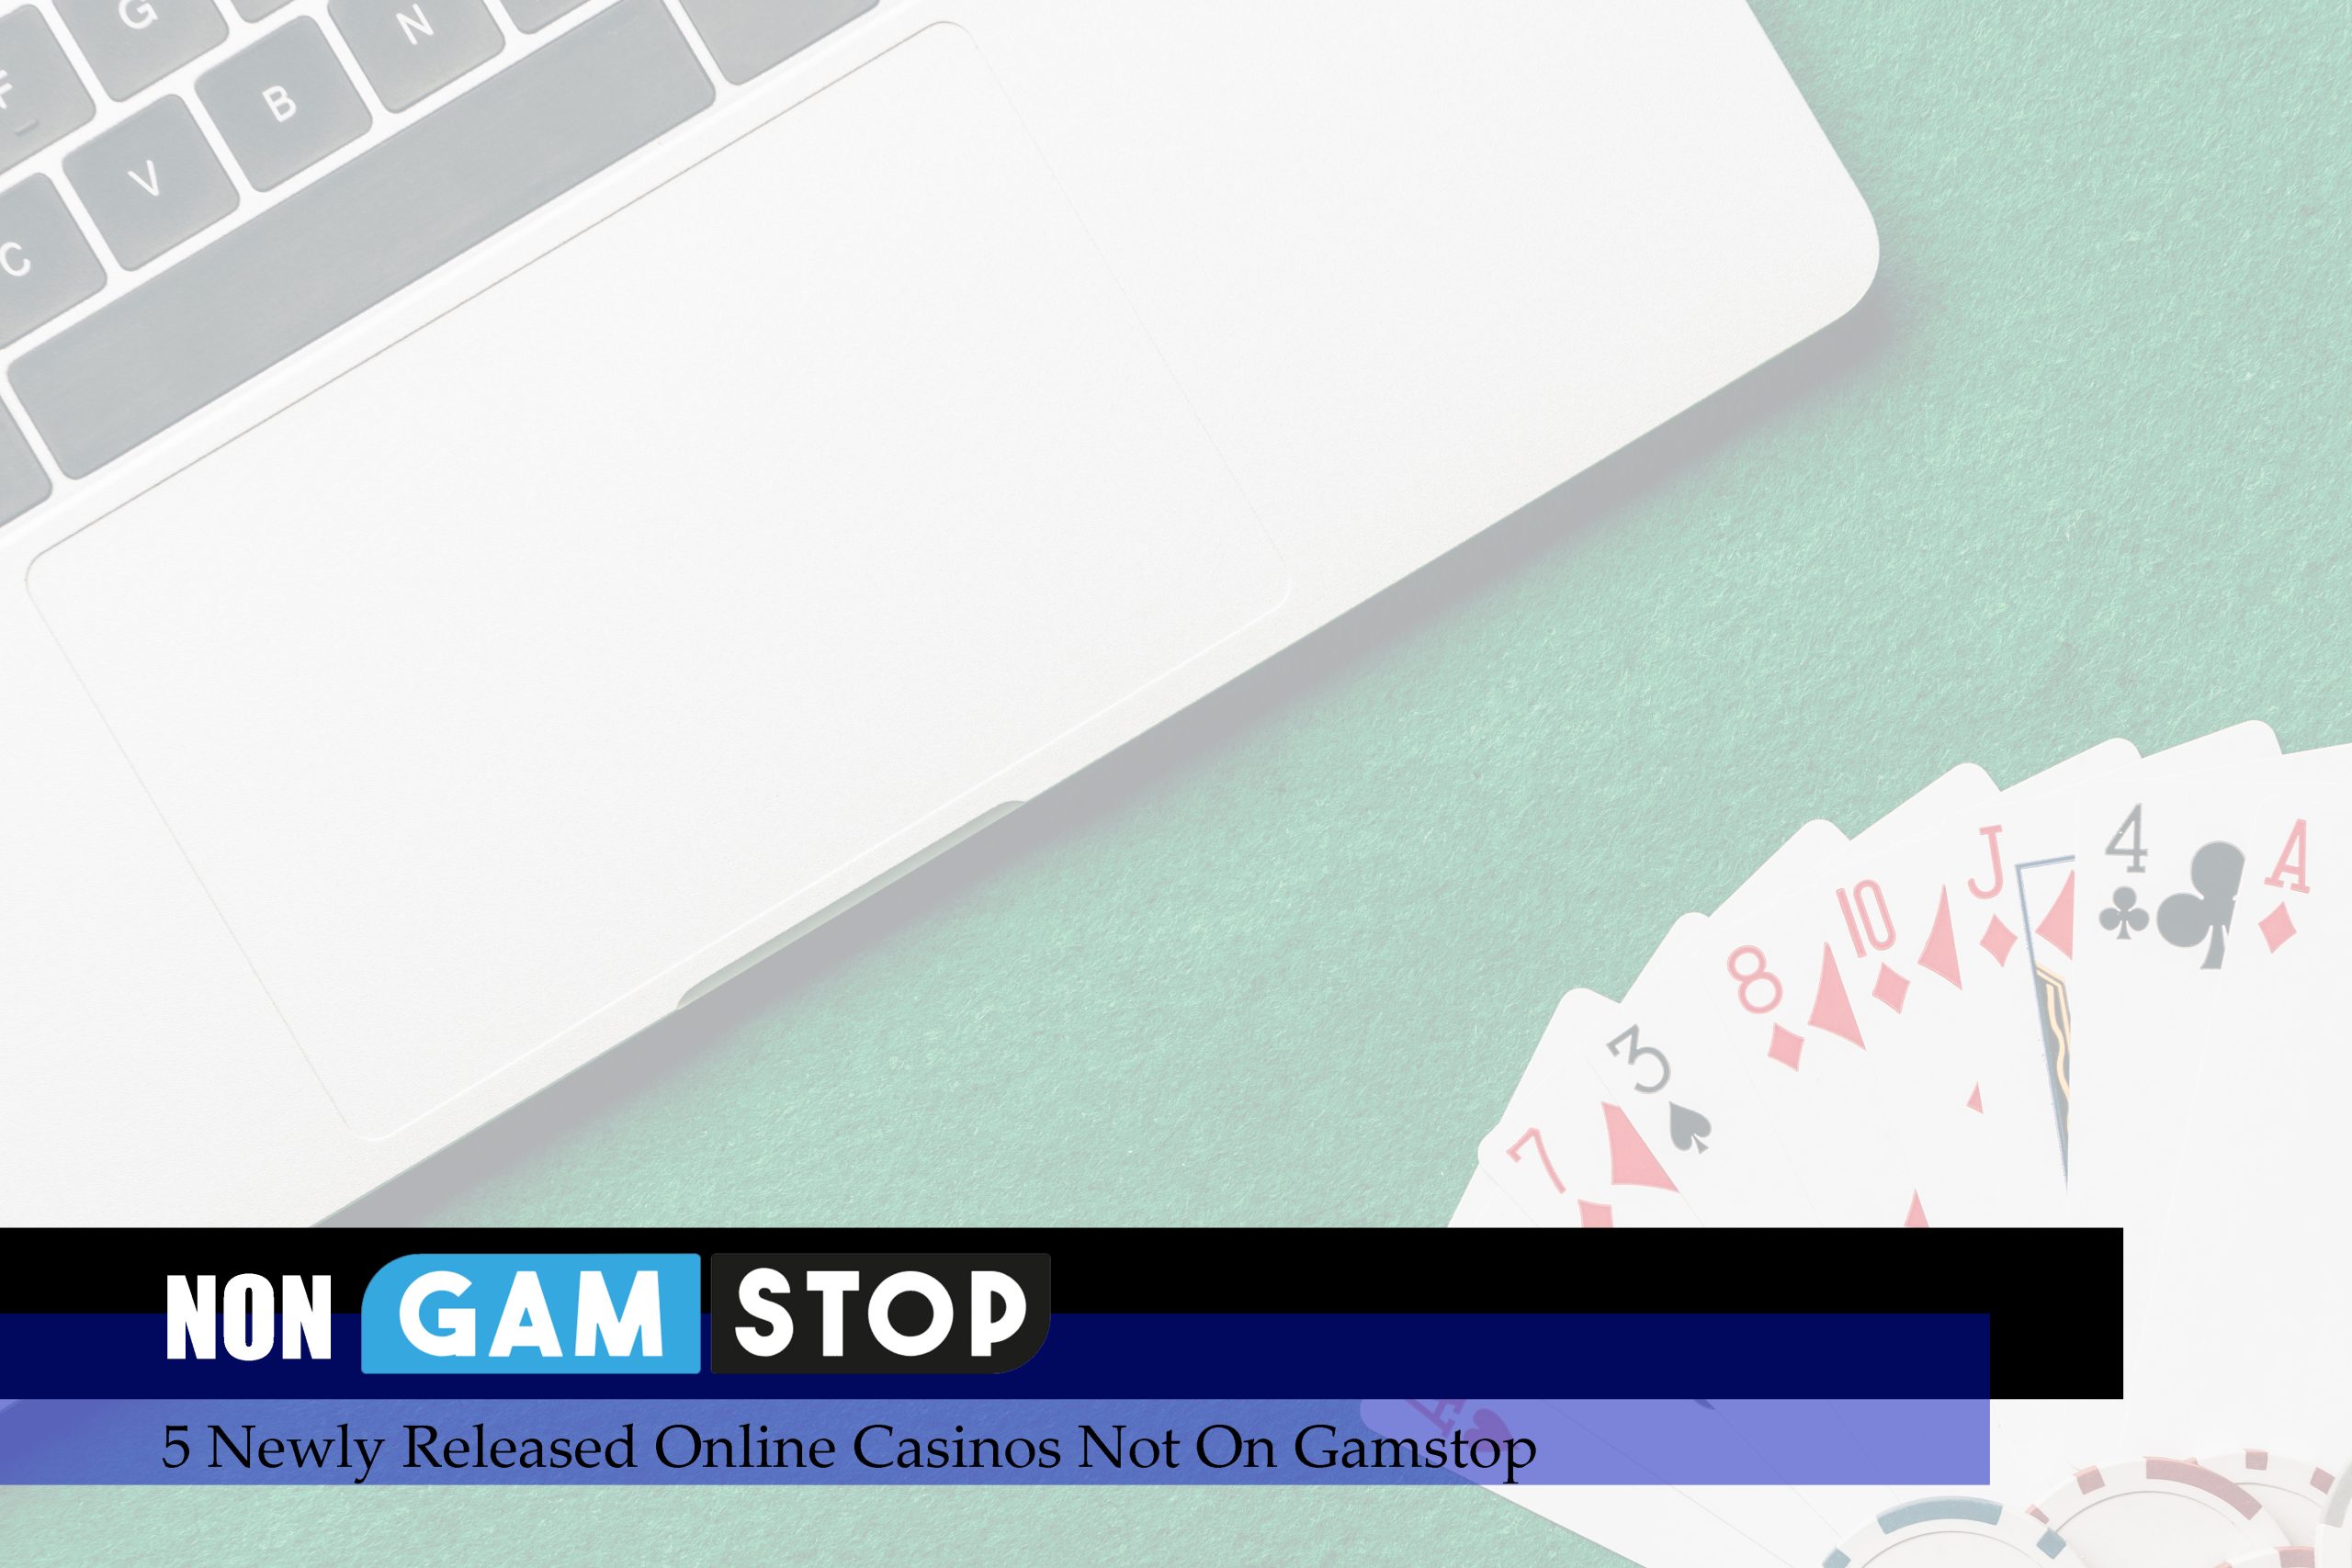 5 Newly Released Online Casinos Not On Gamstop